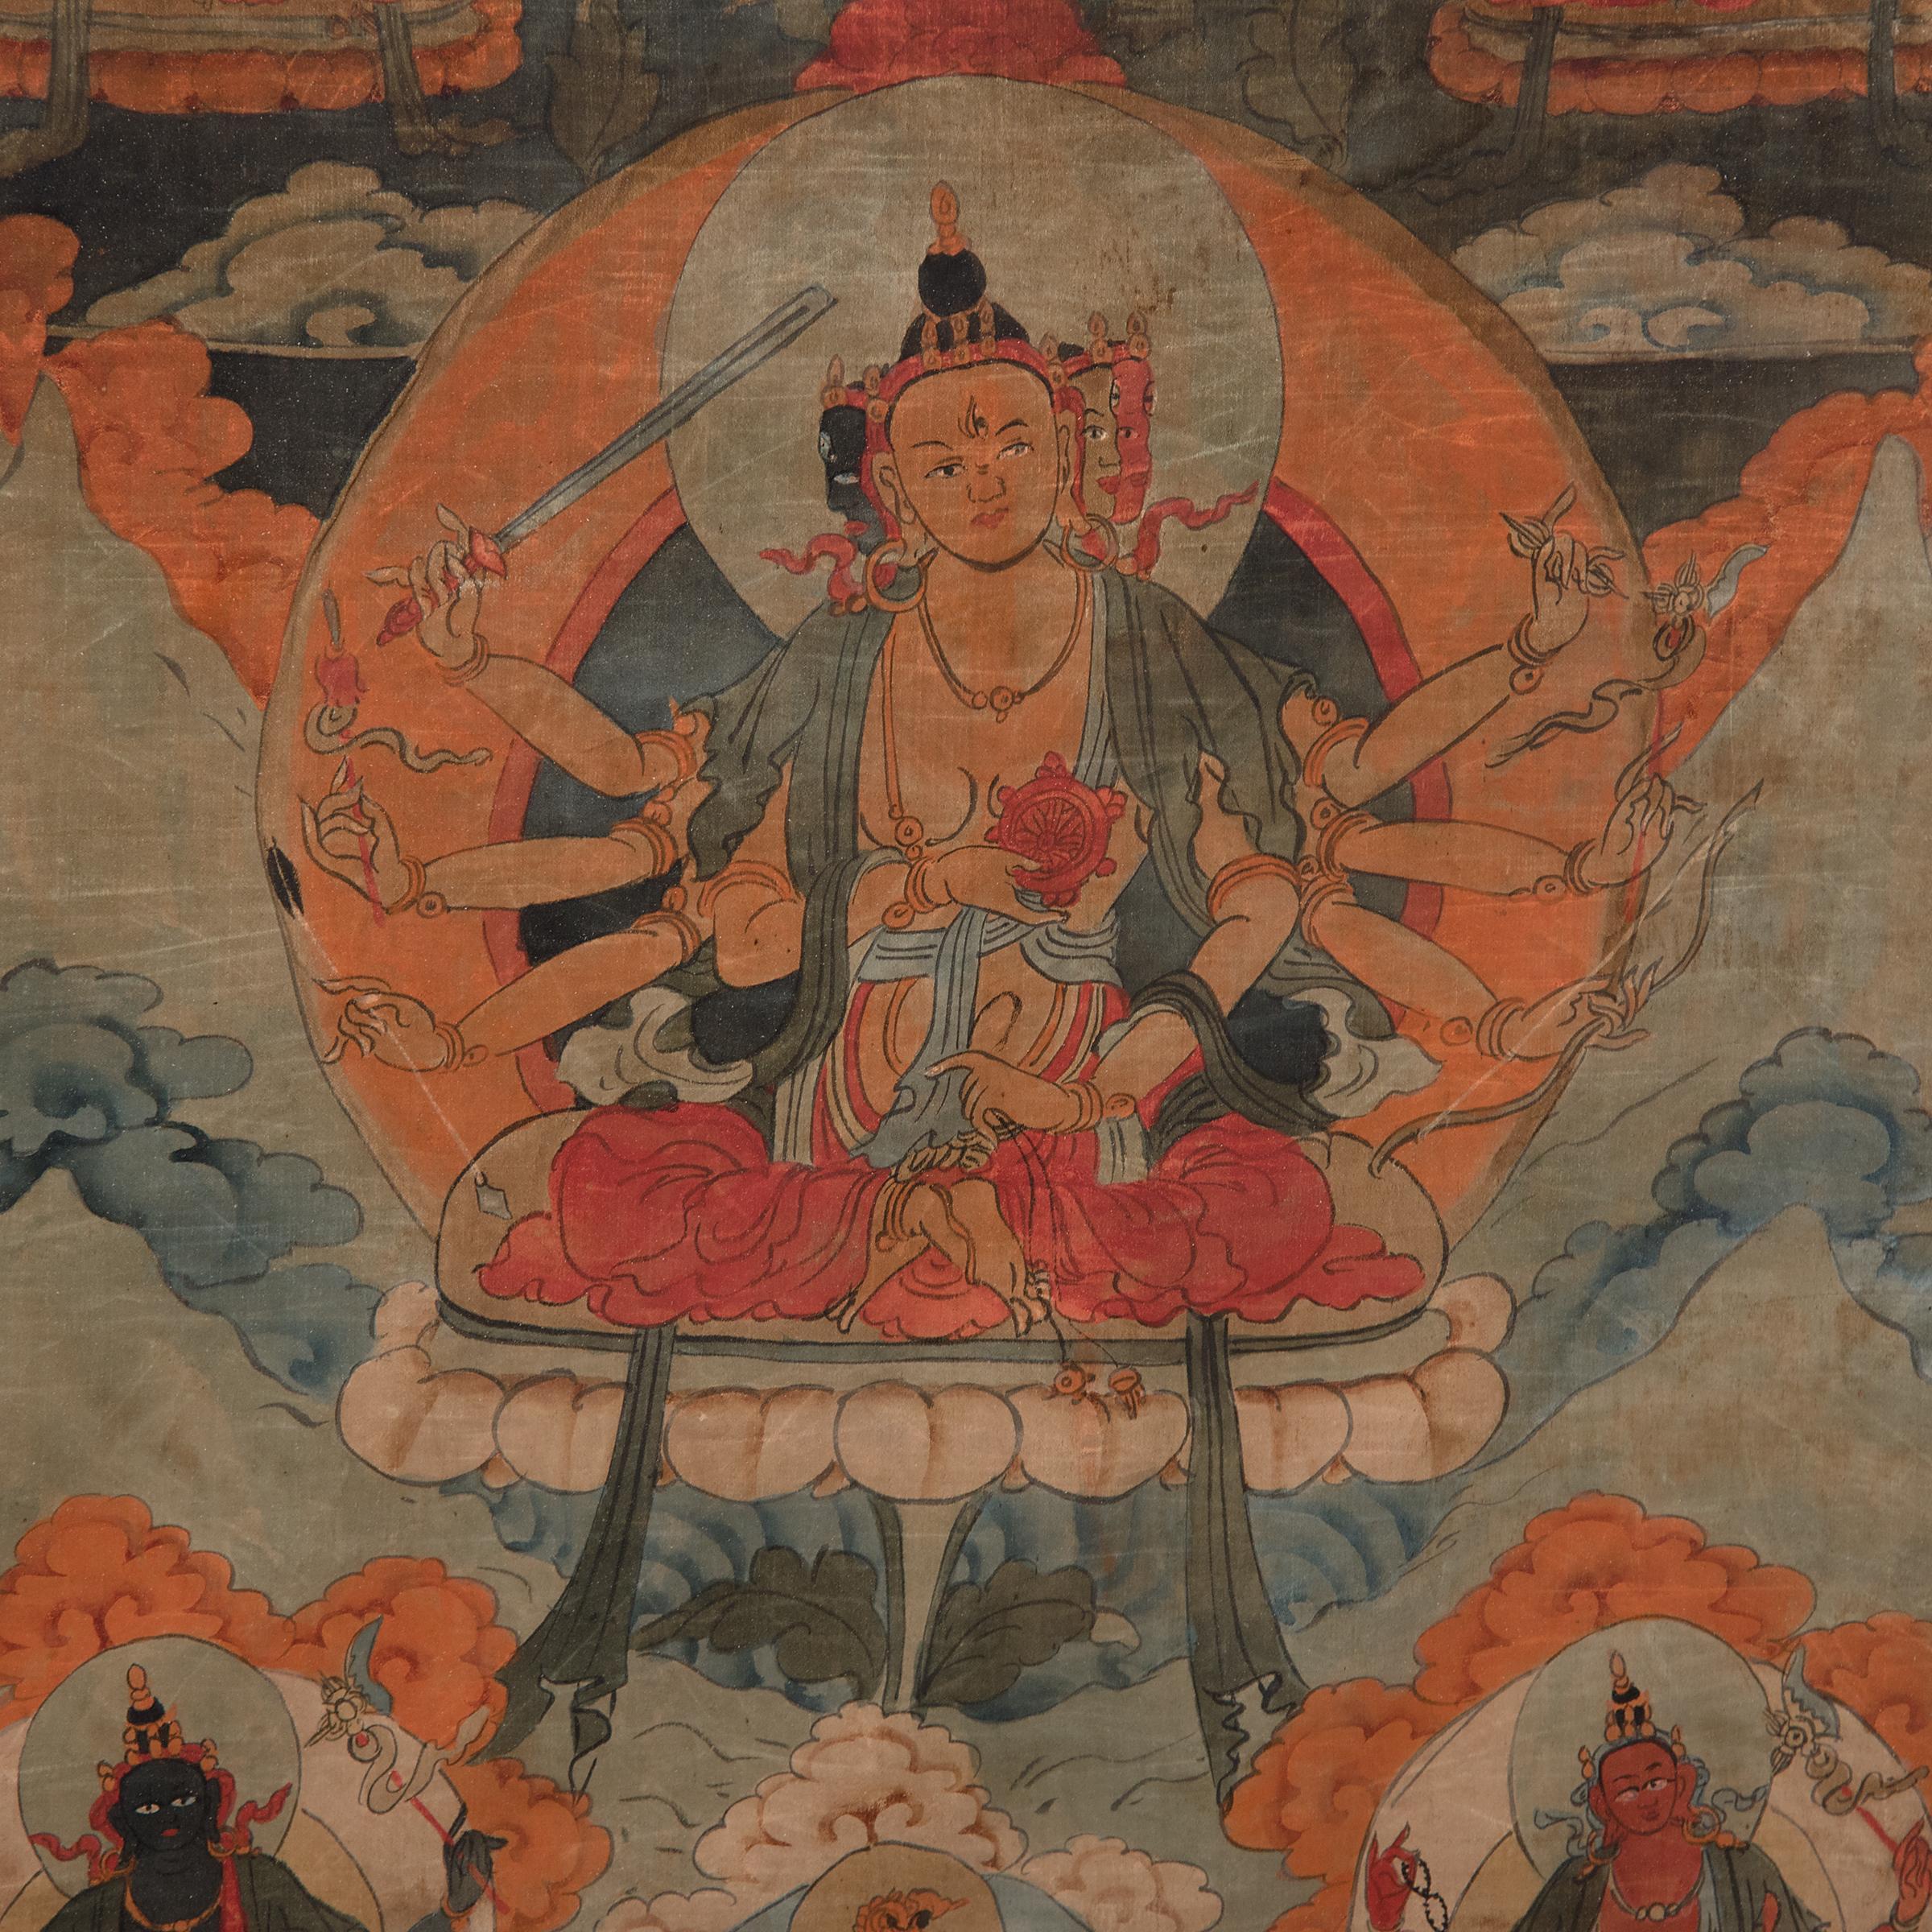 In Buddhist Tibet, patrons and monks commissioned thangka art, or sacred painting, to focus their meditations and prayers. Painted with blue, orange, and red pigments, this 19th century thangka depicts Chenresi, the Buddha of Infinite Compassion and